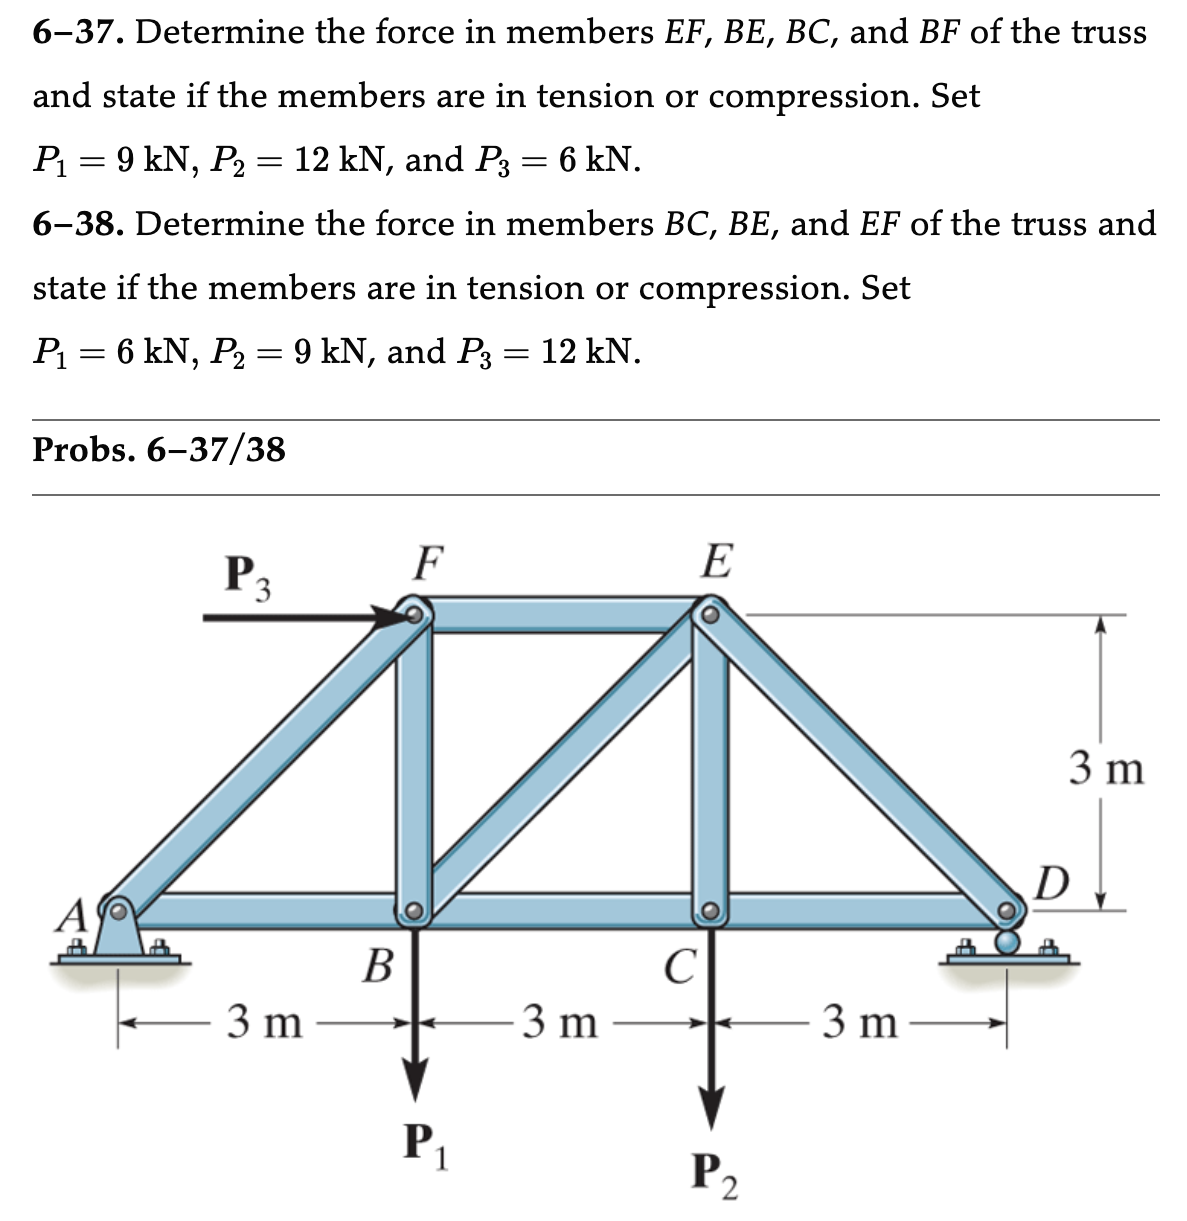 6-37. Determine the force in members EF, BE, BC, and BF of the truss
and state if the members are in tension or compression. Set
P₁ = 9 kN, P₂ = 12 kN, and P3 = 6 kN.
6-38. Determine the force in members BC, BE, and EF of the truss and
state if the members are in tension or compression. Set
P₁ = 6 kN, P₂ = 9 kN, and P3
Probs. 6-37/38
A
P3
3 m
B
F
P₁
= 12 kN.
3 m
E
C
P2
3 m
3 m
D